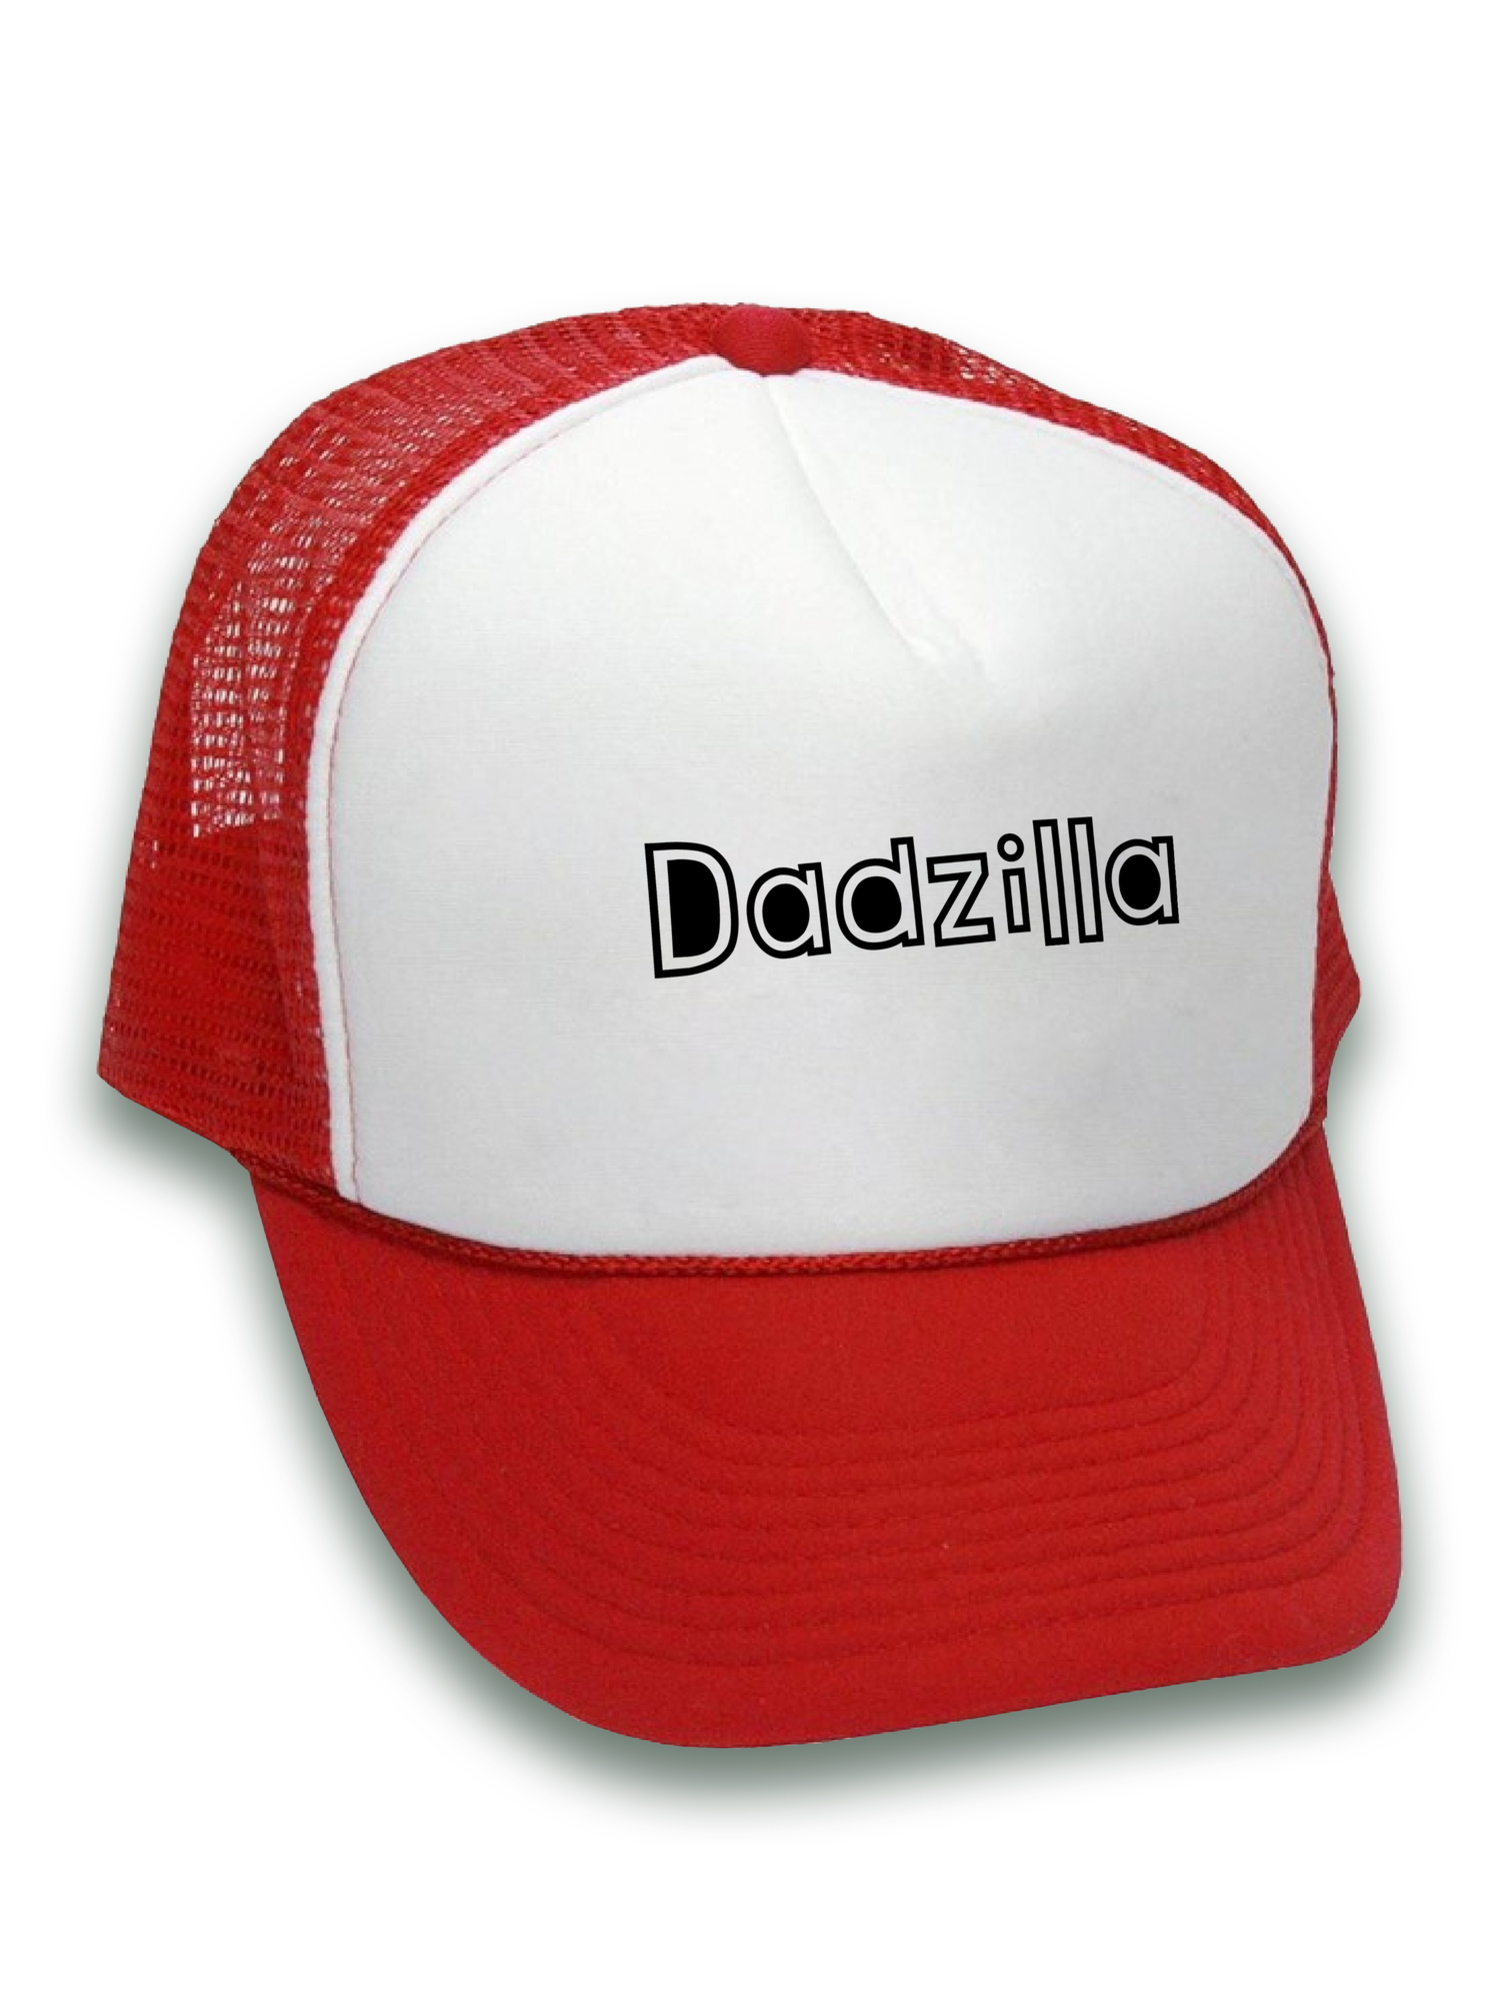 Awkward Styles Gifts for Dad Dadzilla Trucker Hat Funny Dad Hats With Sayings Father's Day Gifts for Men Dad 2018 Hat Boss Dad Snapback Hat Father's Day Trucker Hats for Men Dad Accessories Daddy Cap - image 2 of 6